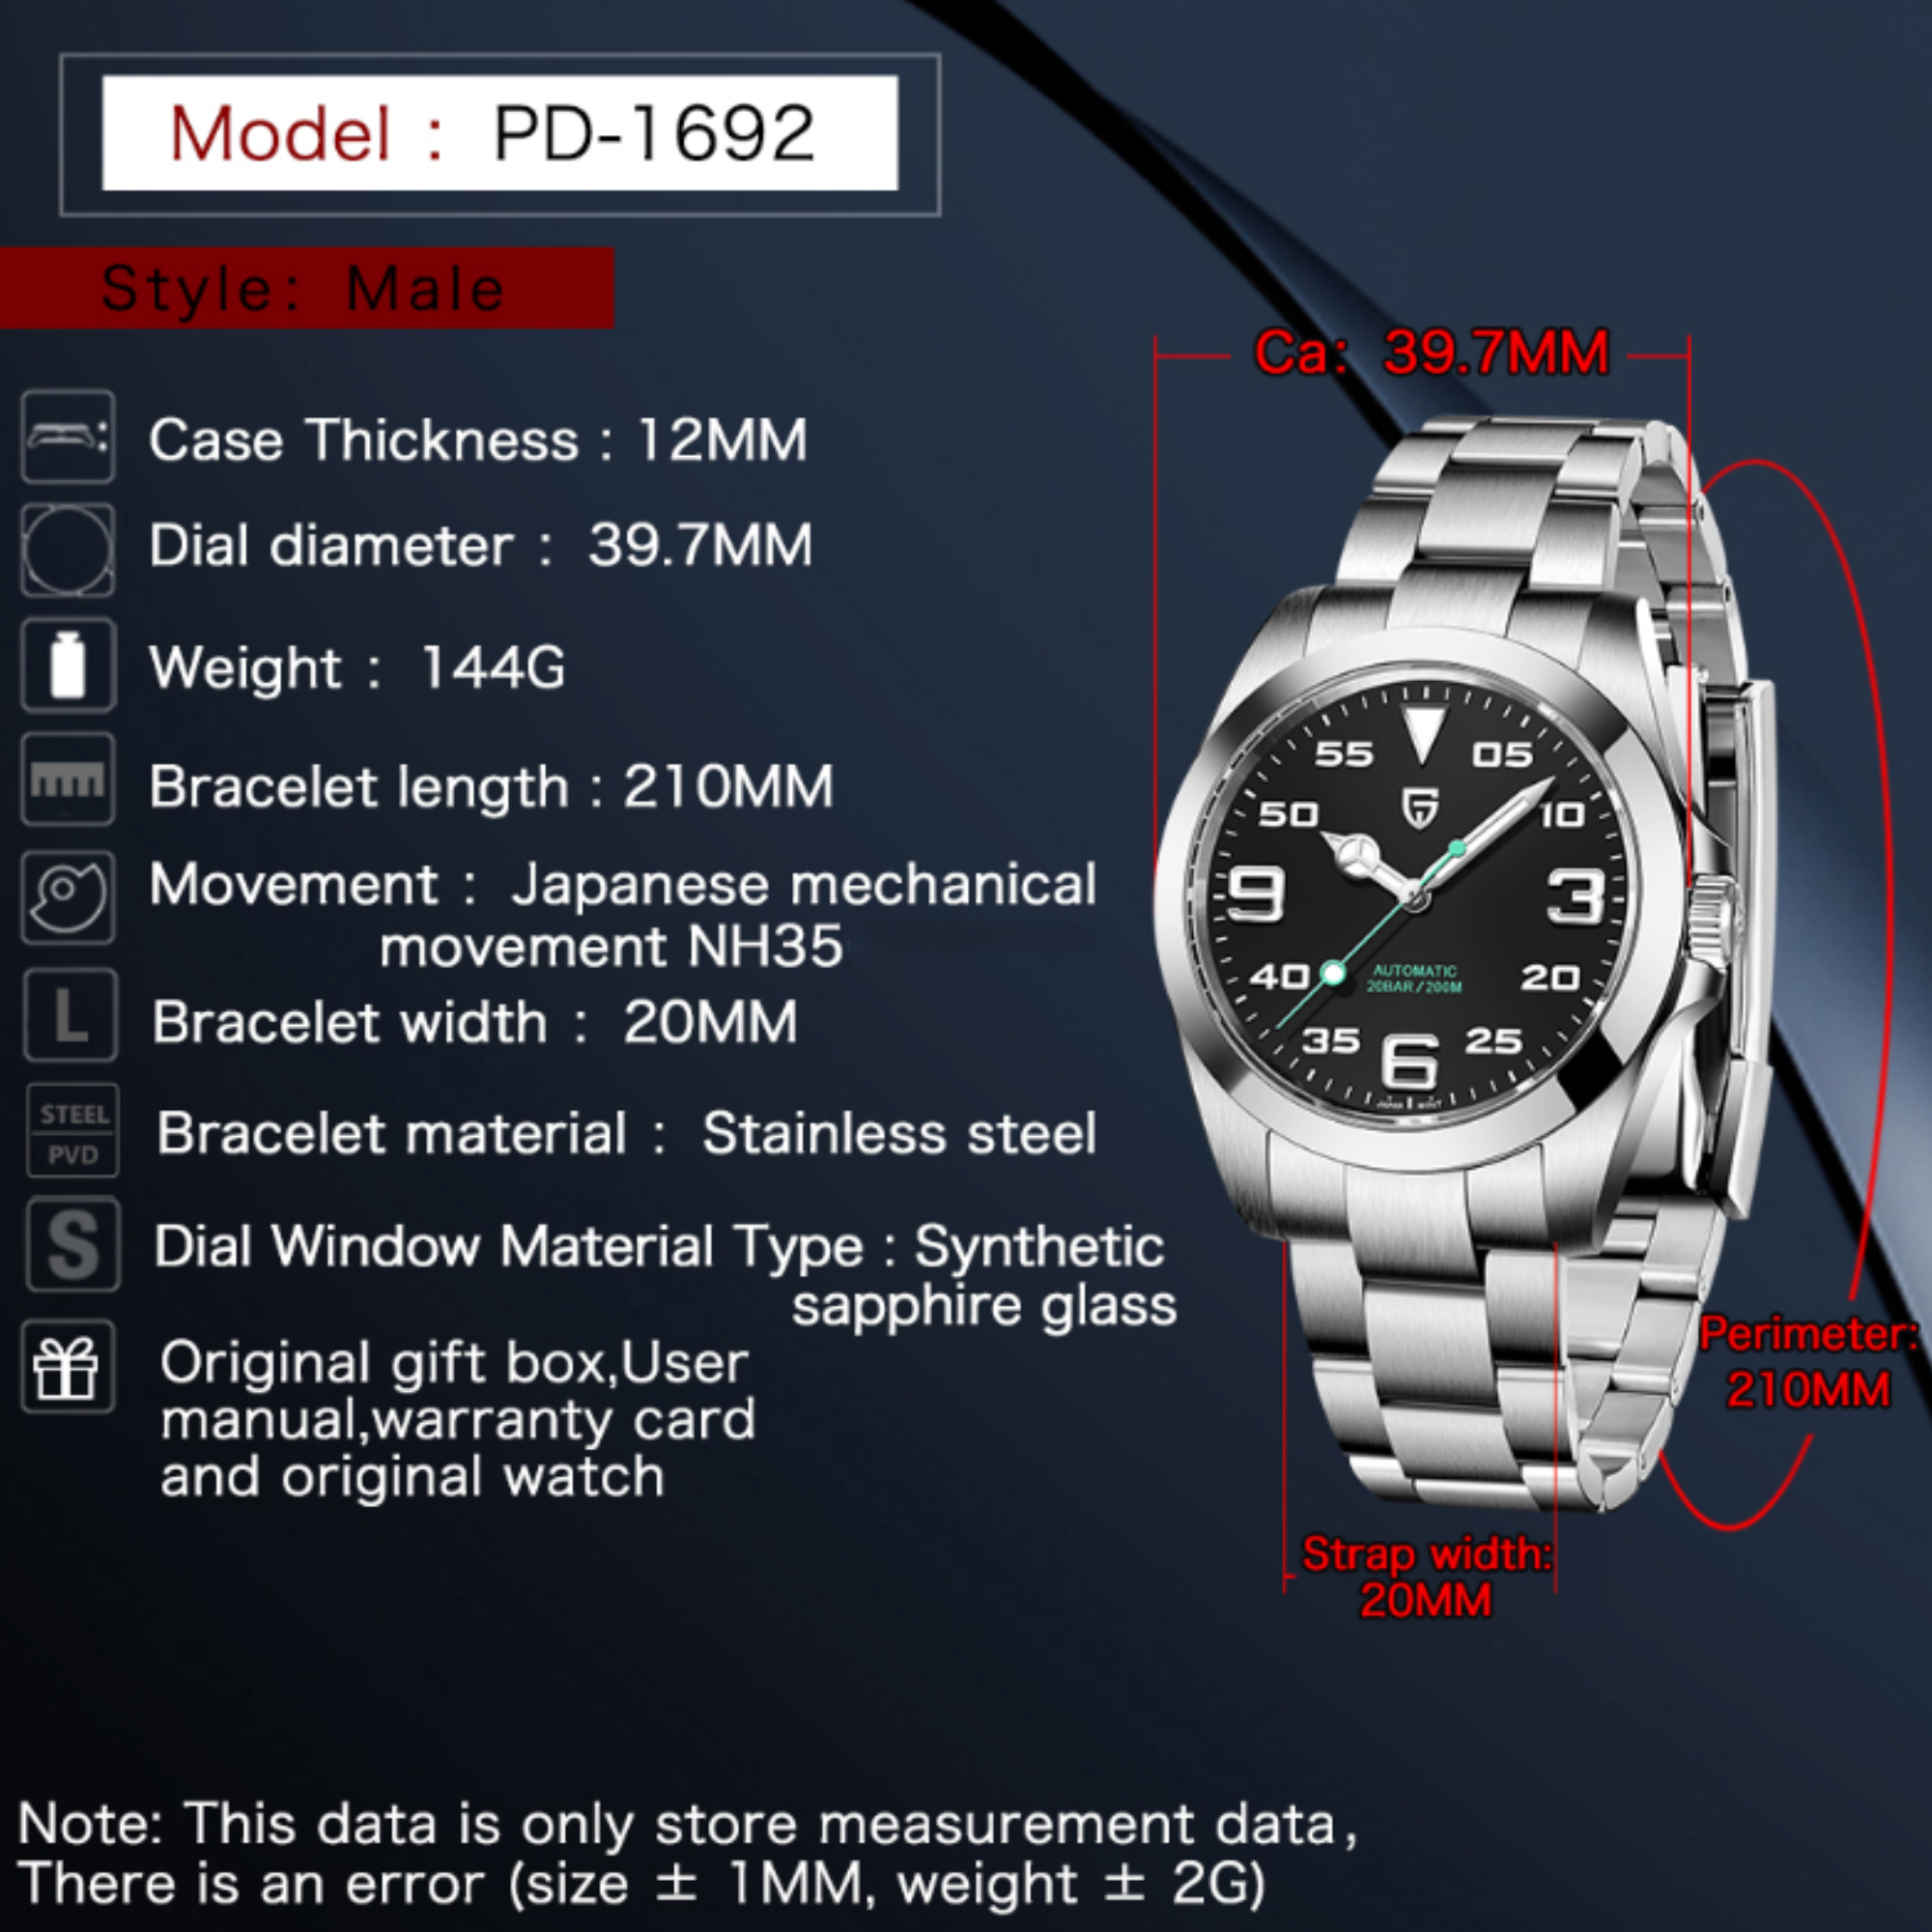 Pagani Design PD-1692 39.7 MM (Japan NH35 Automatic Movement) Mechanical Watch Stainless Steel Watch - New Air King V2